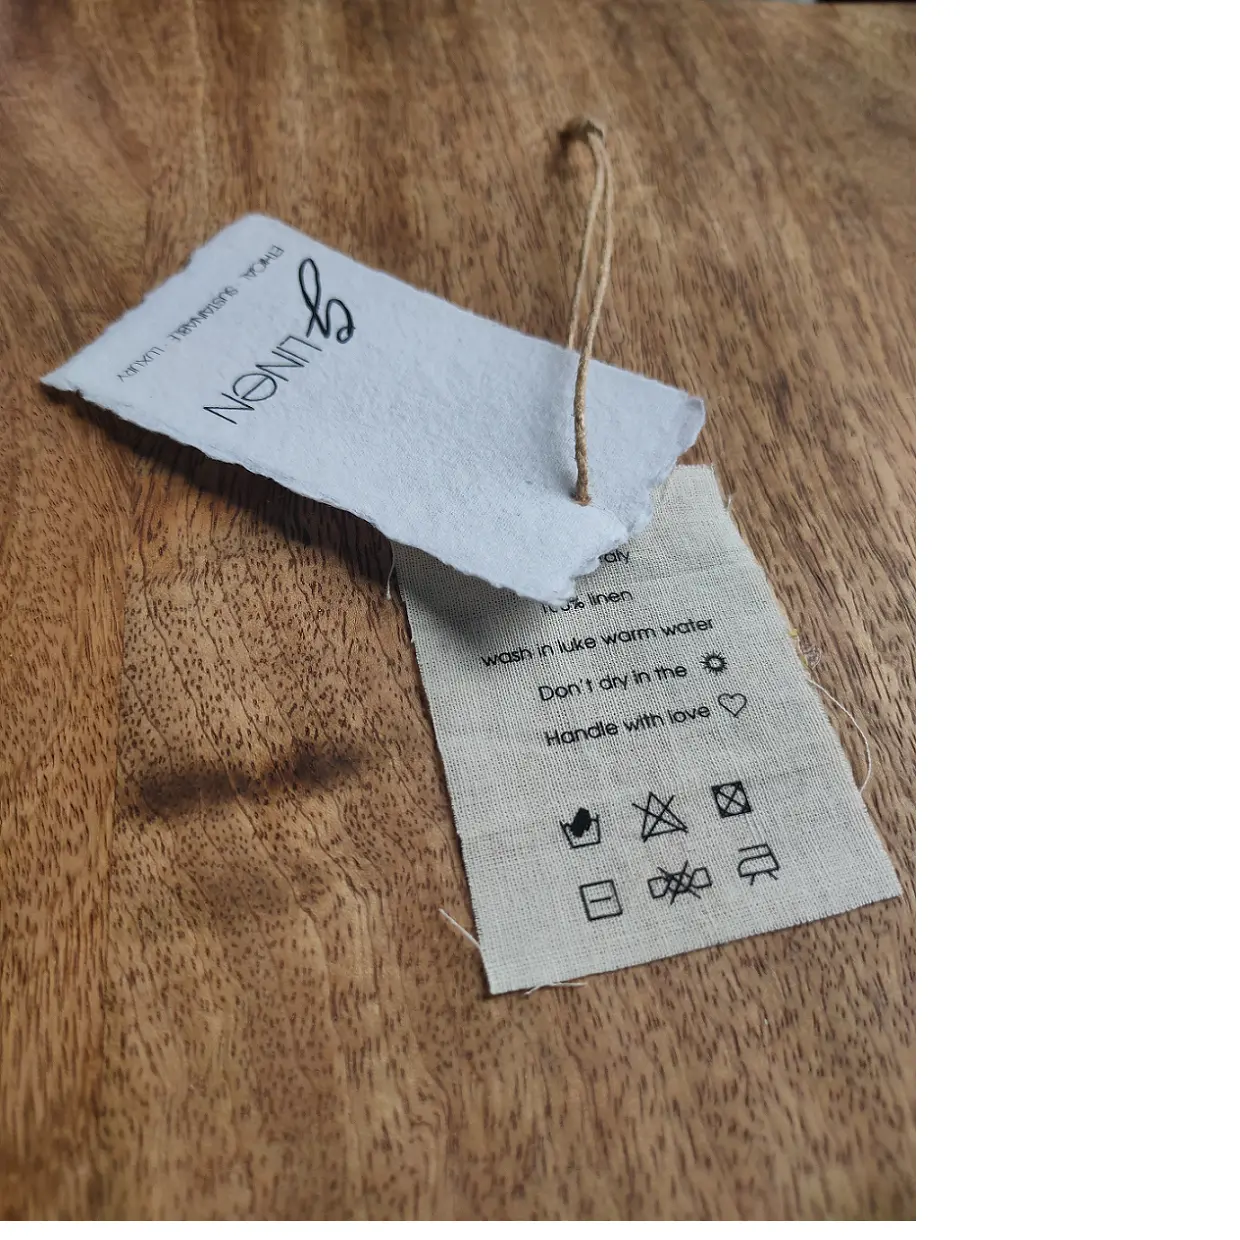 deckle edged printed hang tags with cotton fabric inserts, suitable for clothing designers and manufacturers